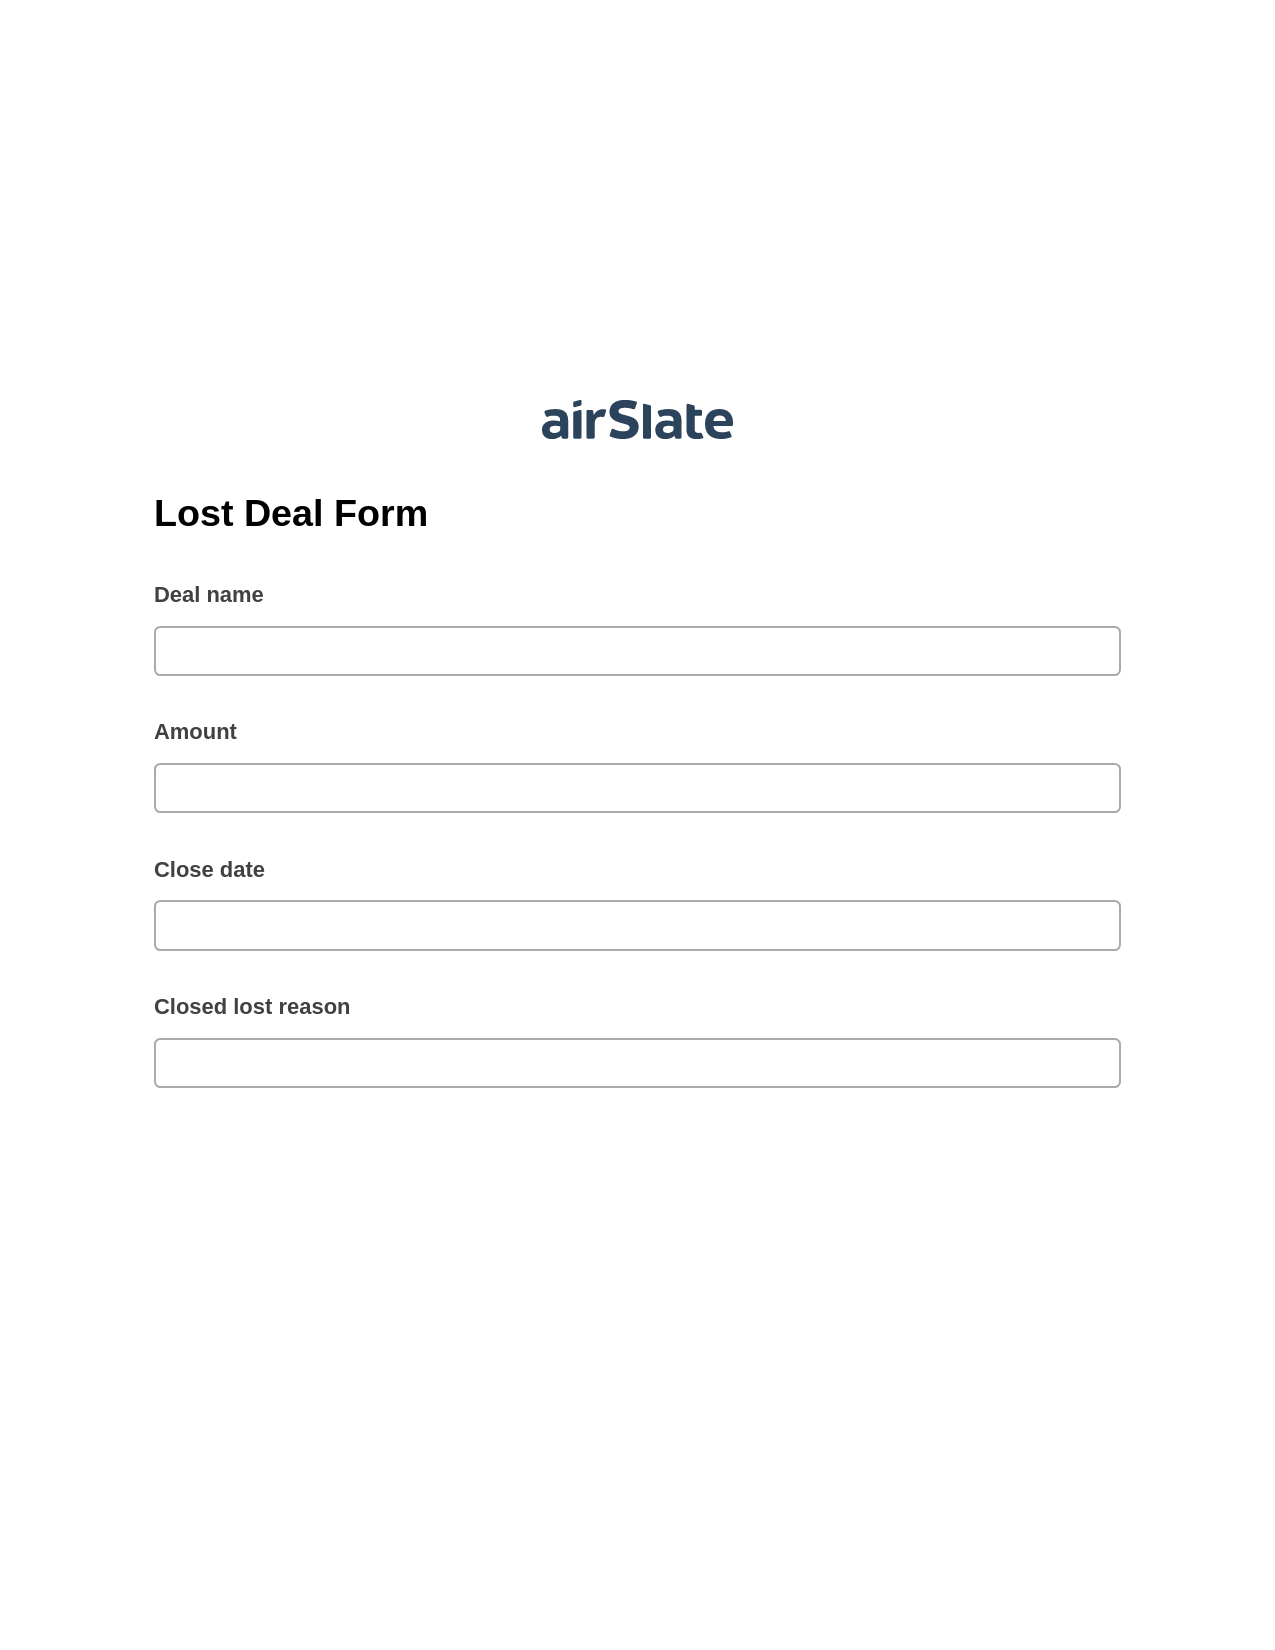 Multirole Lost Deal Form Pre-fill from Google Sheets Bot, Remove Slate Bot, Archive to SharePoint Folder Bot